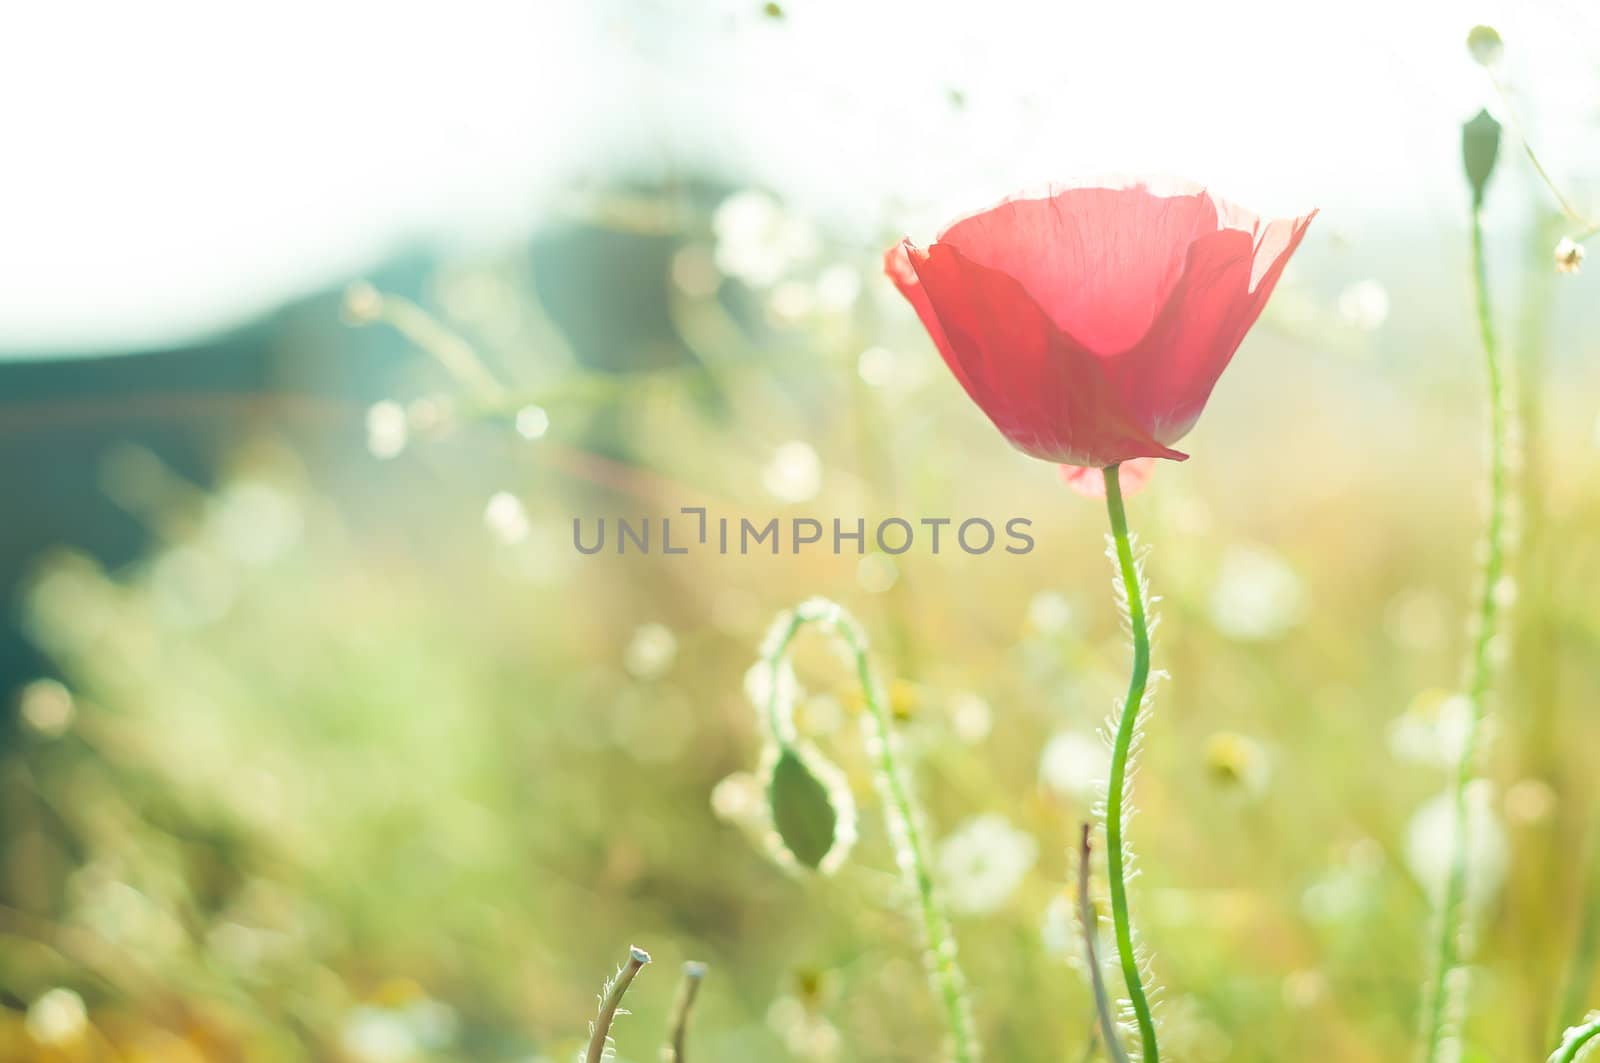 Red poppies in the field with nature light by moggara12